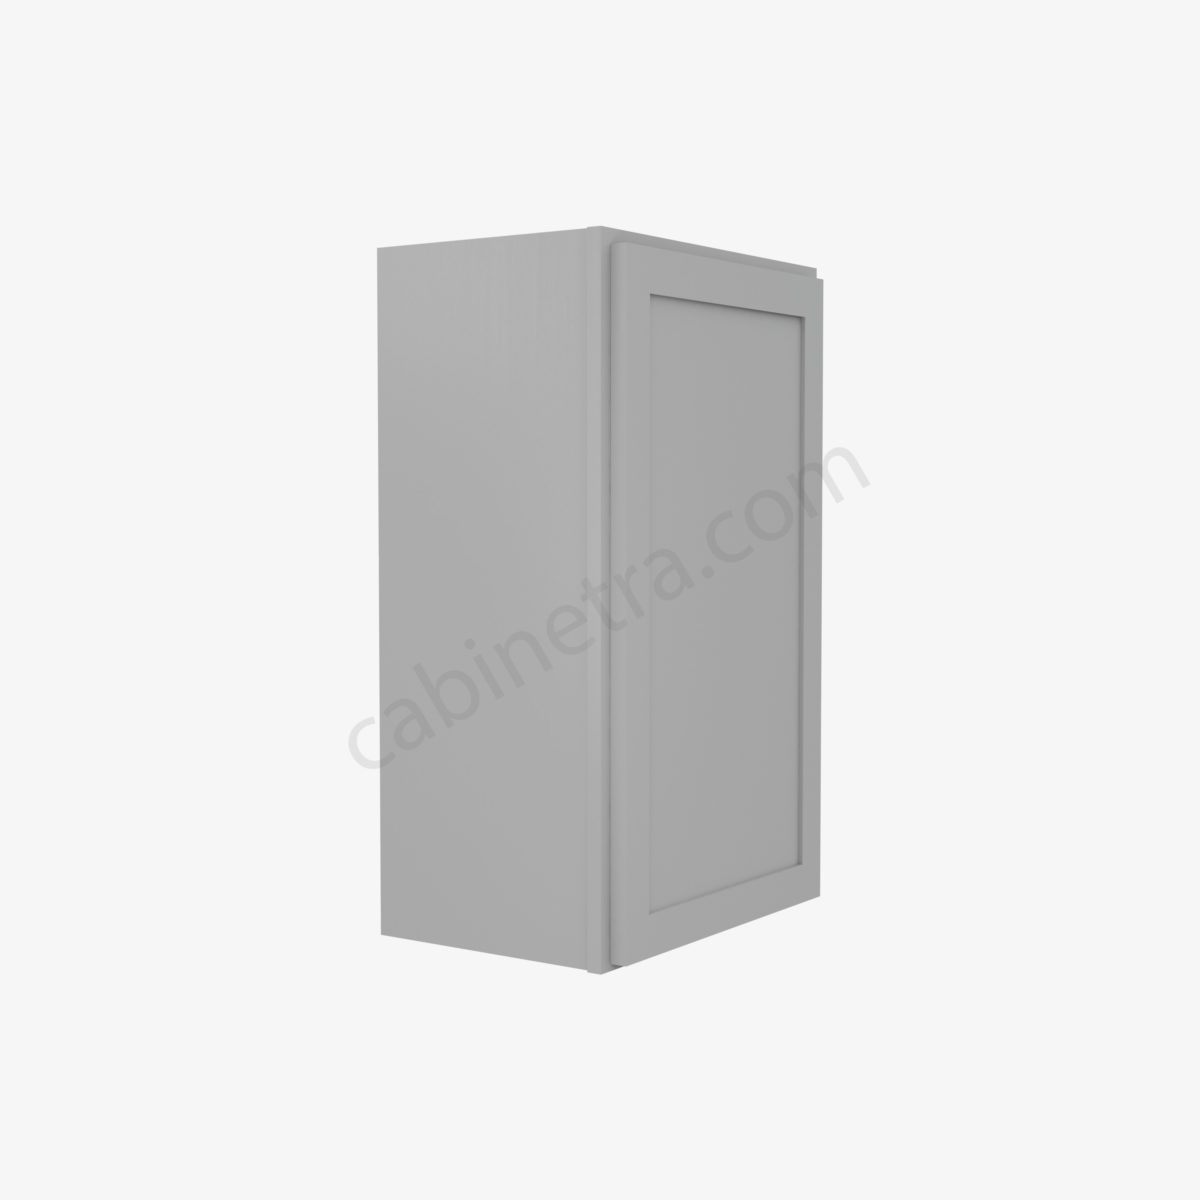 AB W1830 4 Forevermark Lait Gray Shaker Cabinetra scaled